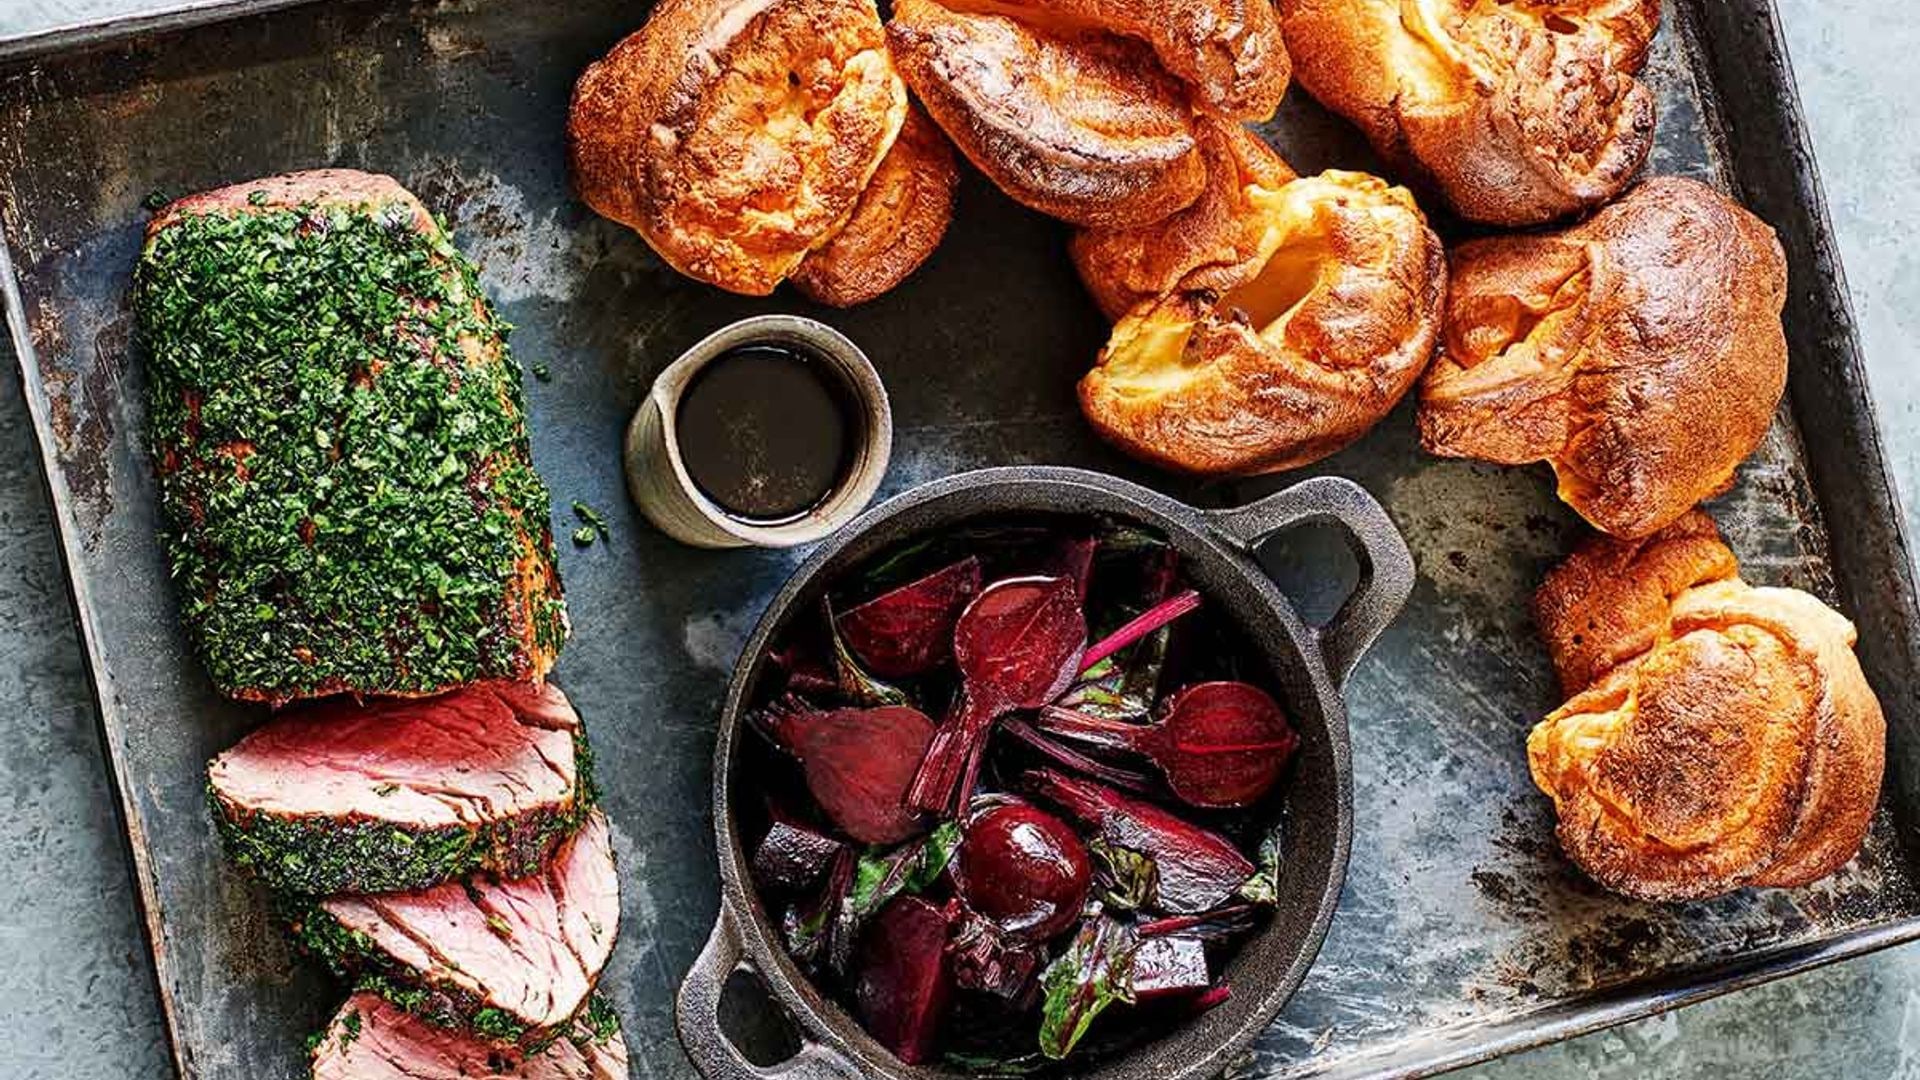 Cooking up a roast dinner this weekend? James Martin shares his herb coated beef and Yorkshire pudding recipe